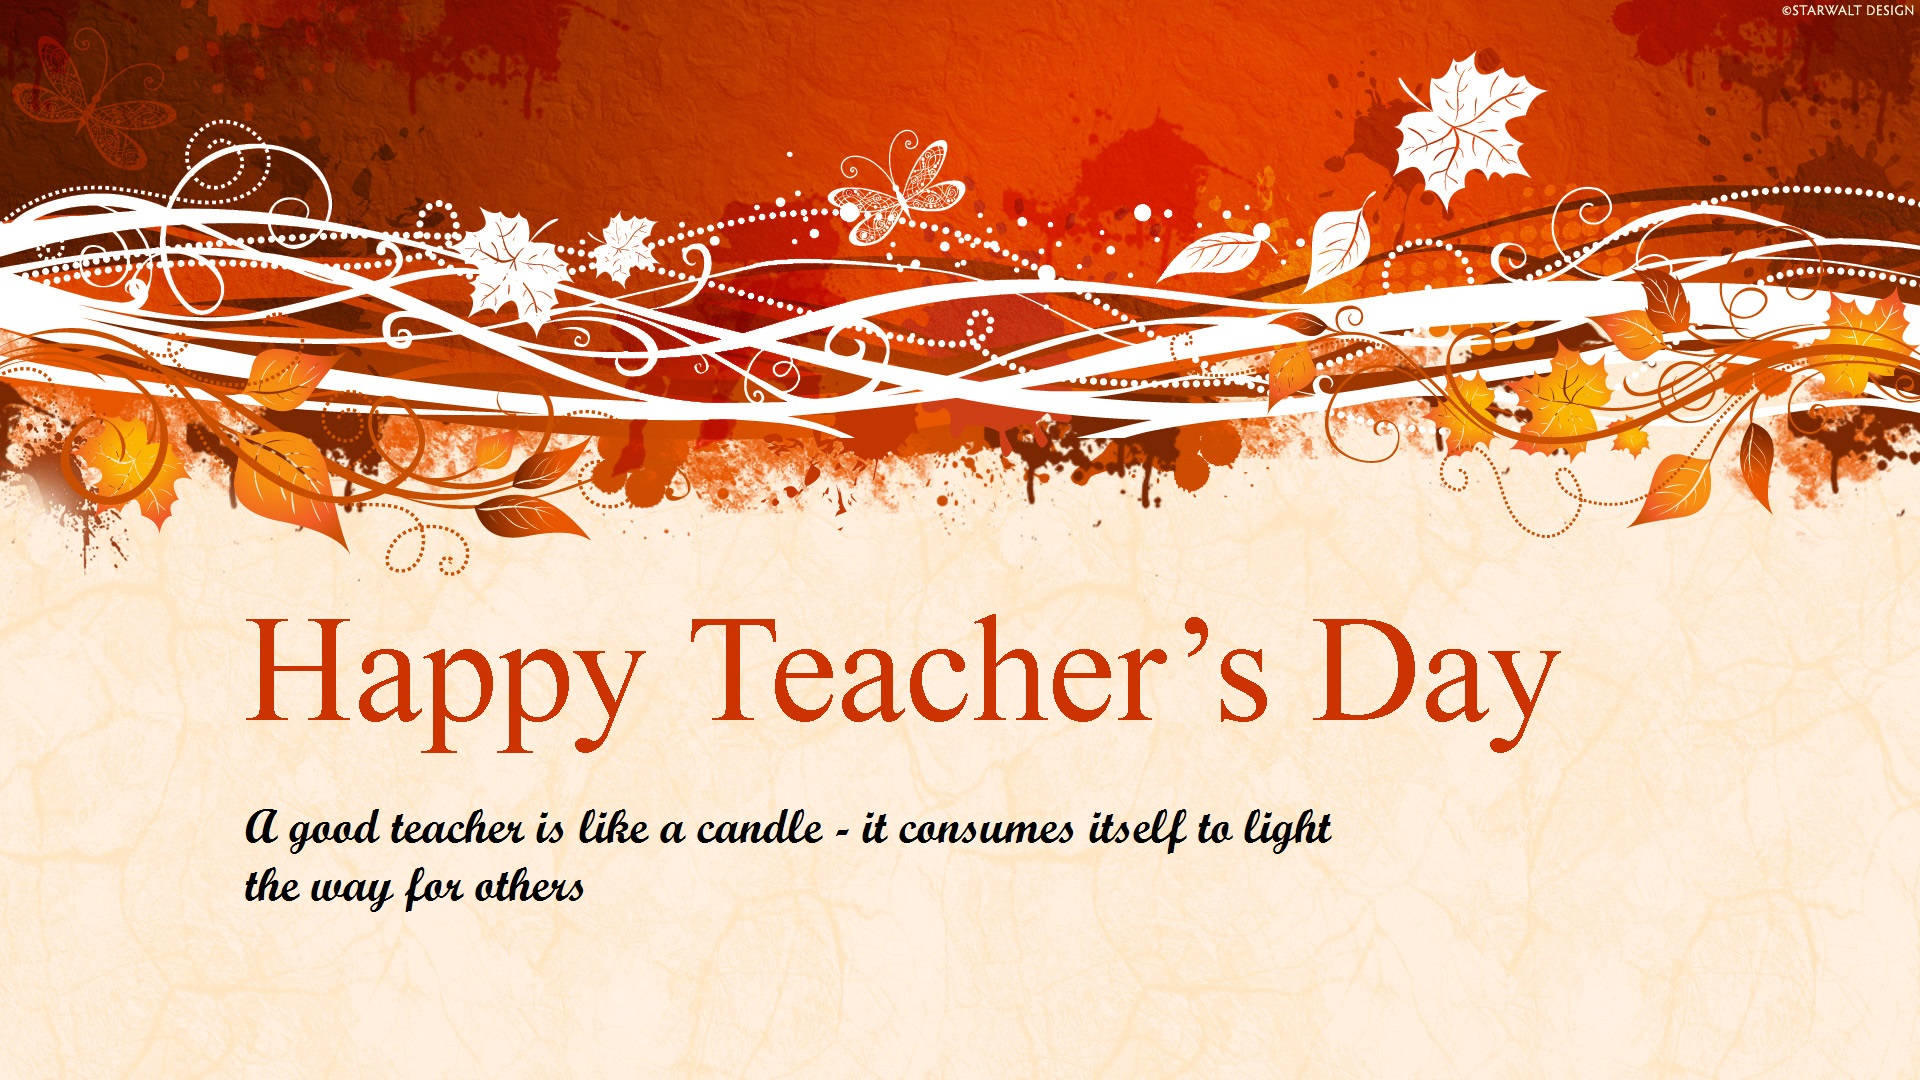 Happy Teachers' Day Candle Light Background